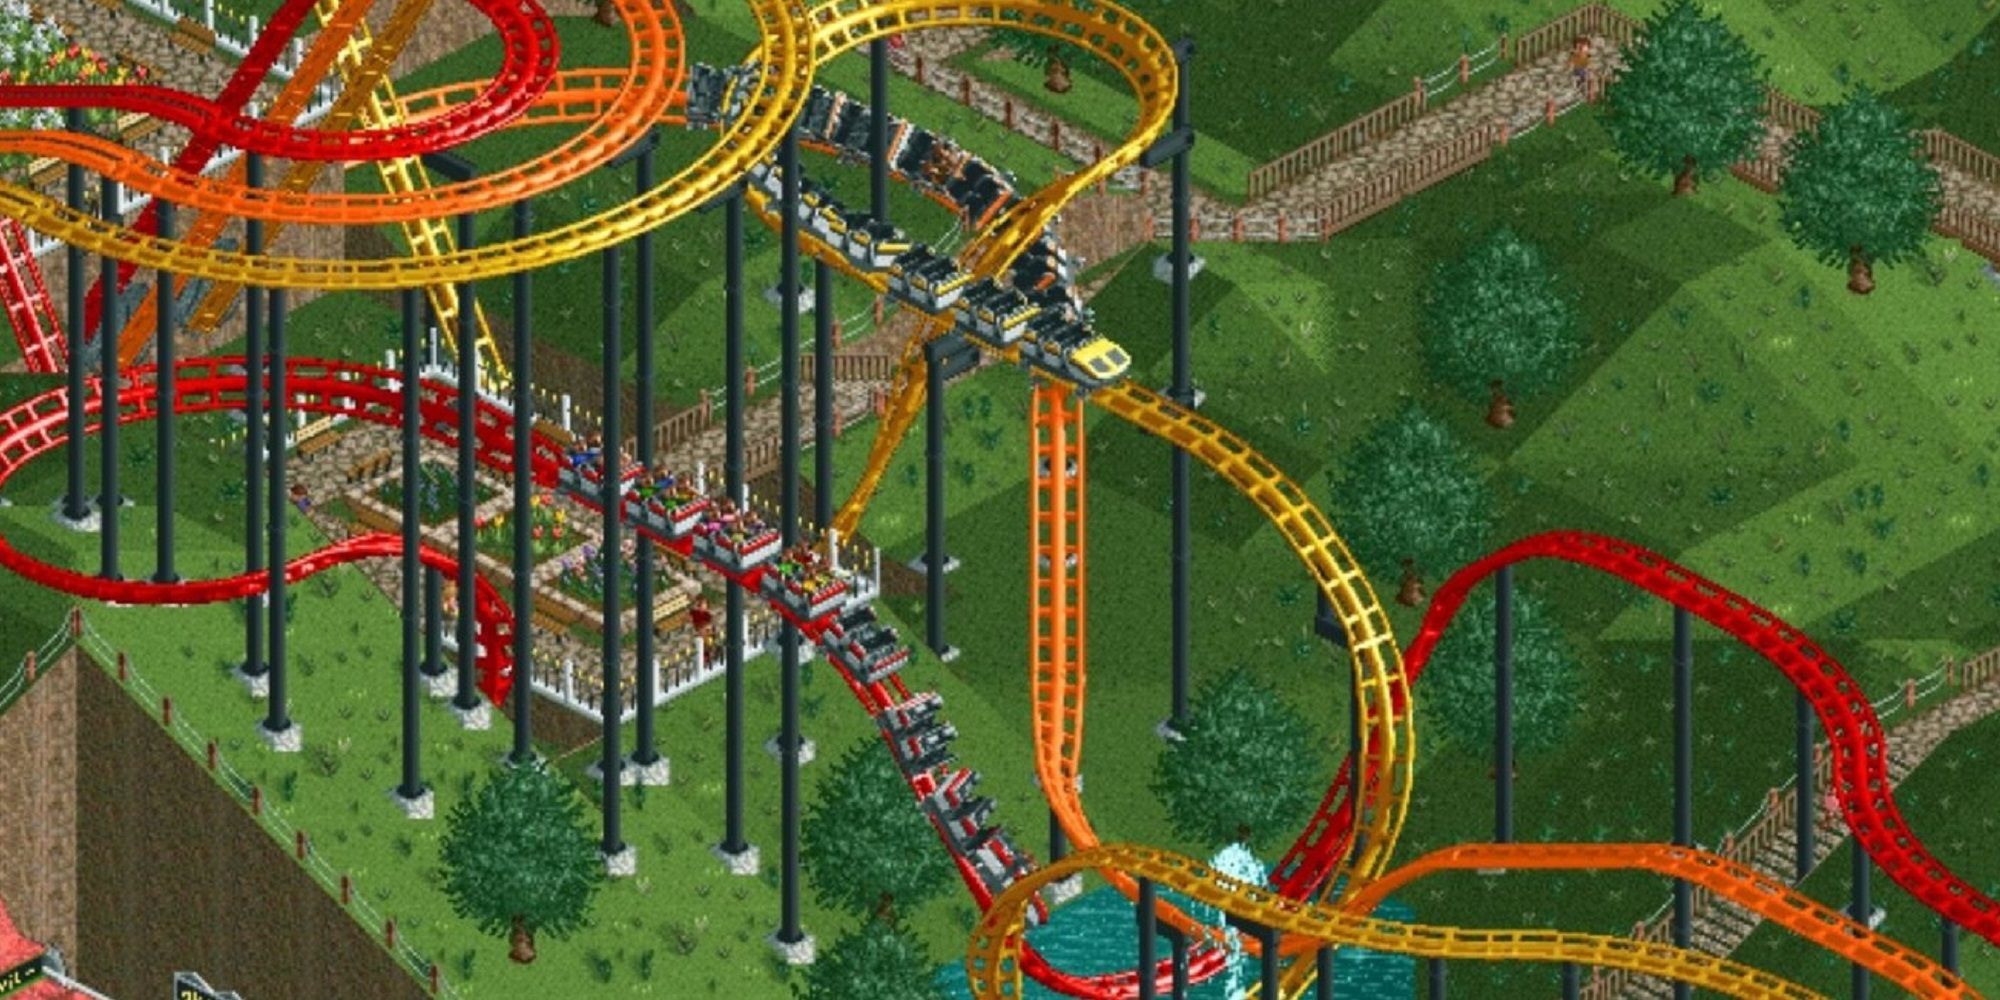 Screencap from Rollercoaster Tycoon game showing red, orange, and yellow coaster